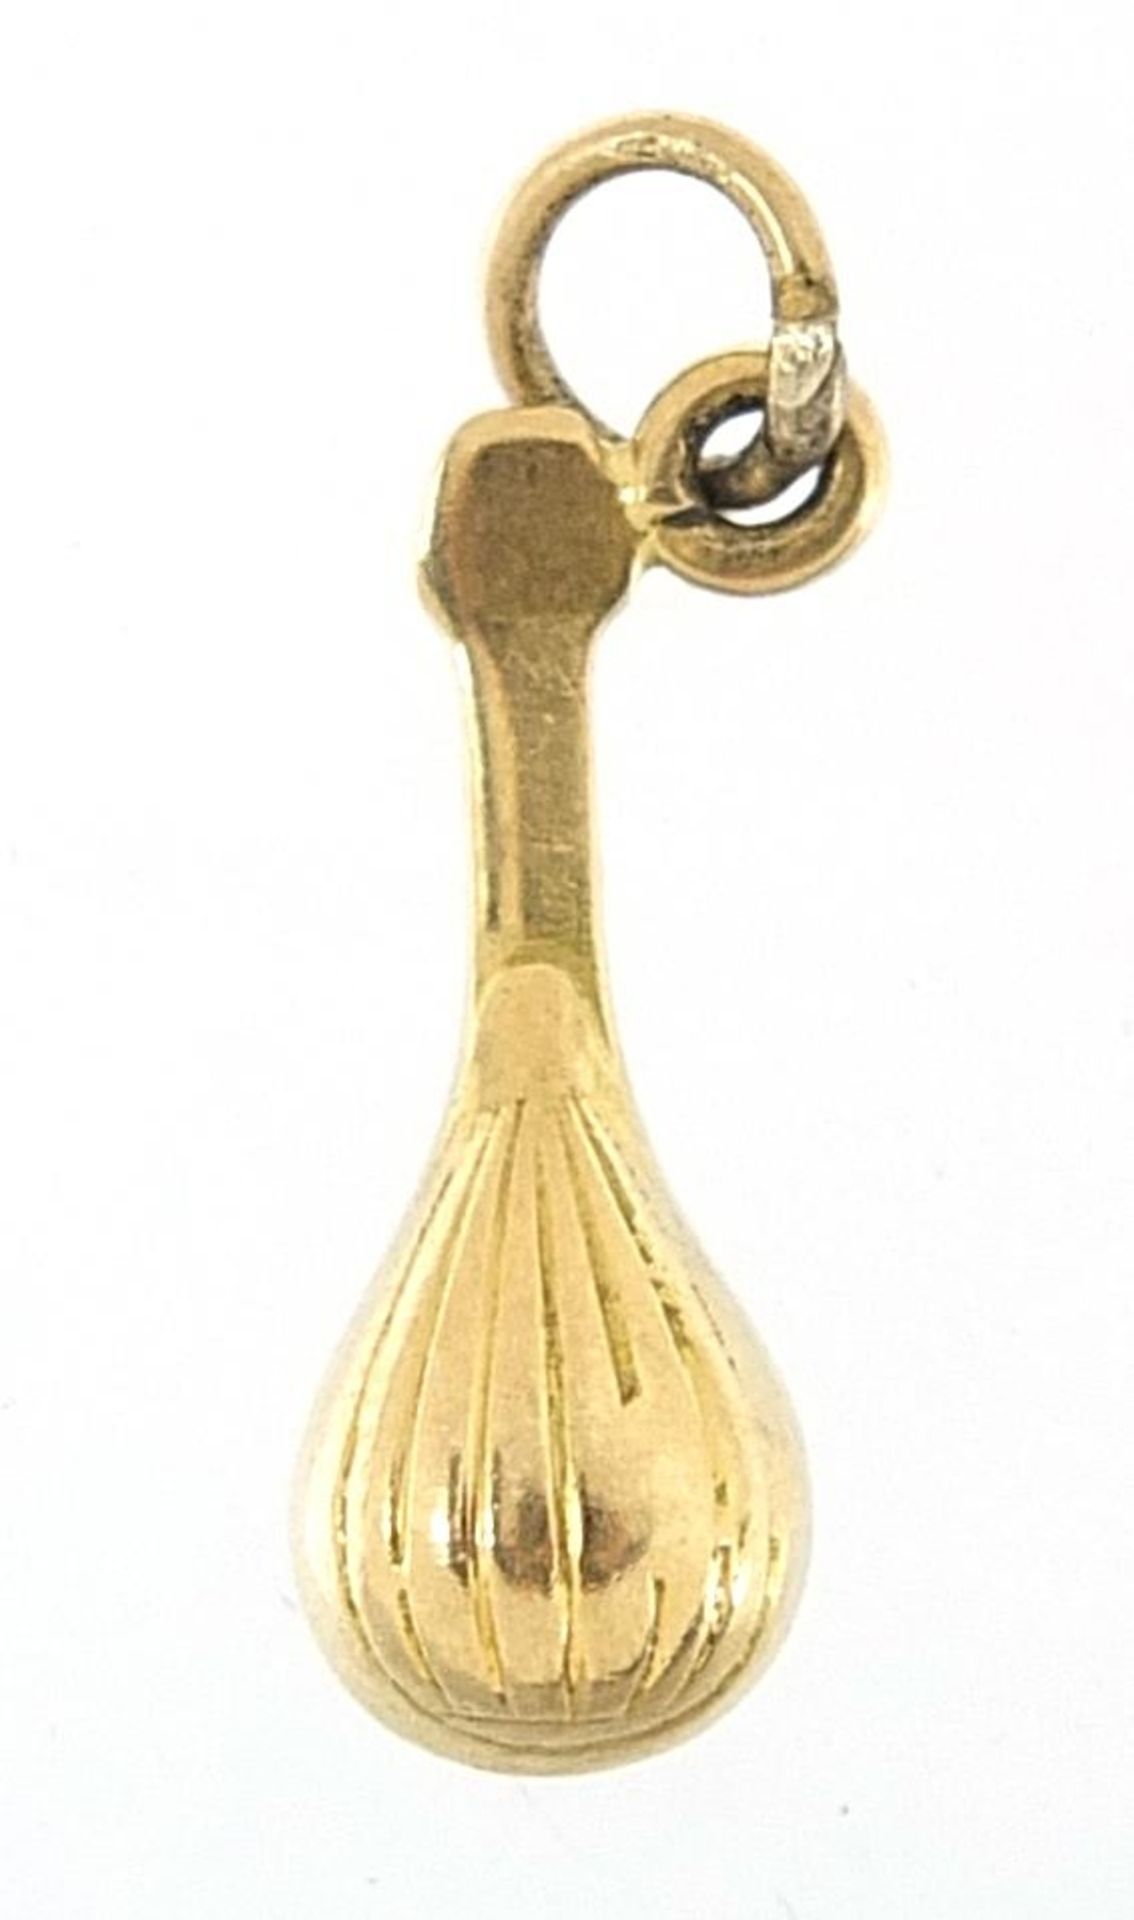 9ct gold mandolin charm, 1.5cm in length, 1.0g - Image 2 of 2